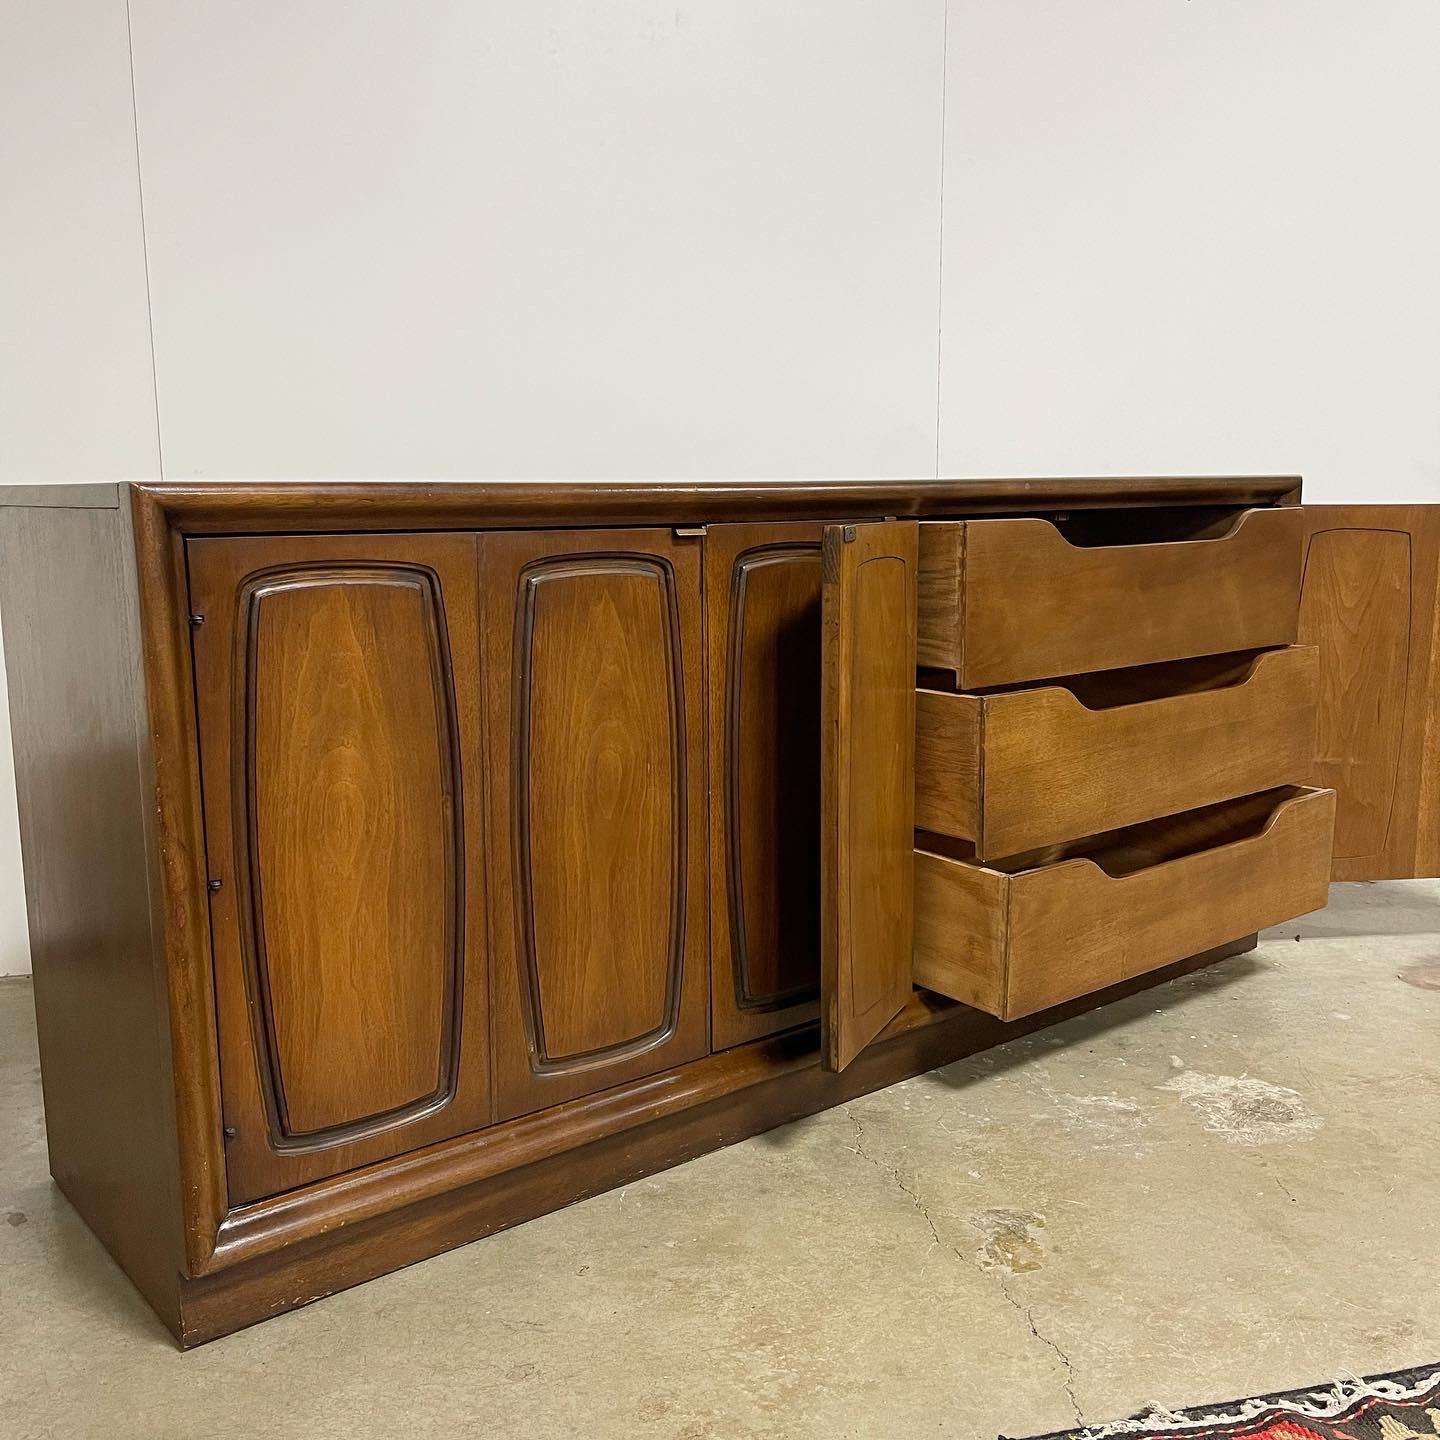 Mid century sideboard by Broyhill. Out of the Emphasis line. Walnut build. Very well built and sturdy! This piece offers double doors with the iconic emphasis design on the front. The left side offers modular shelves for storage. The right side